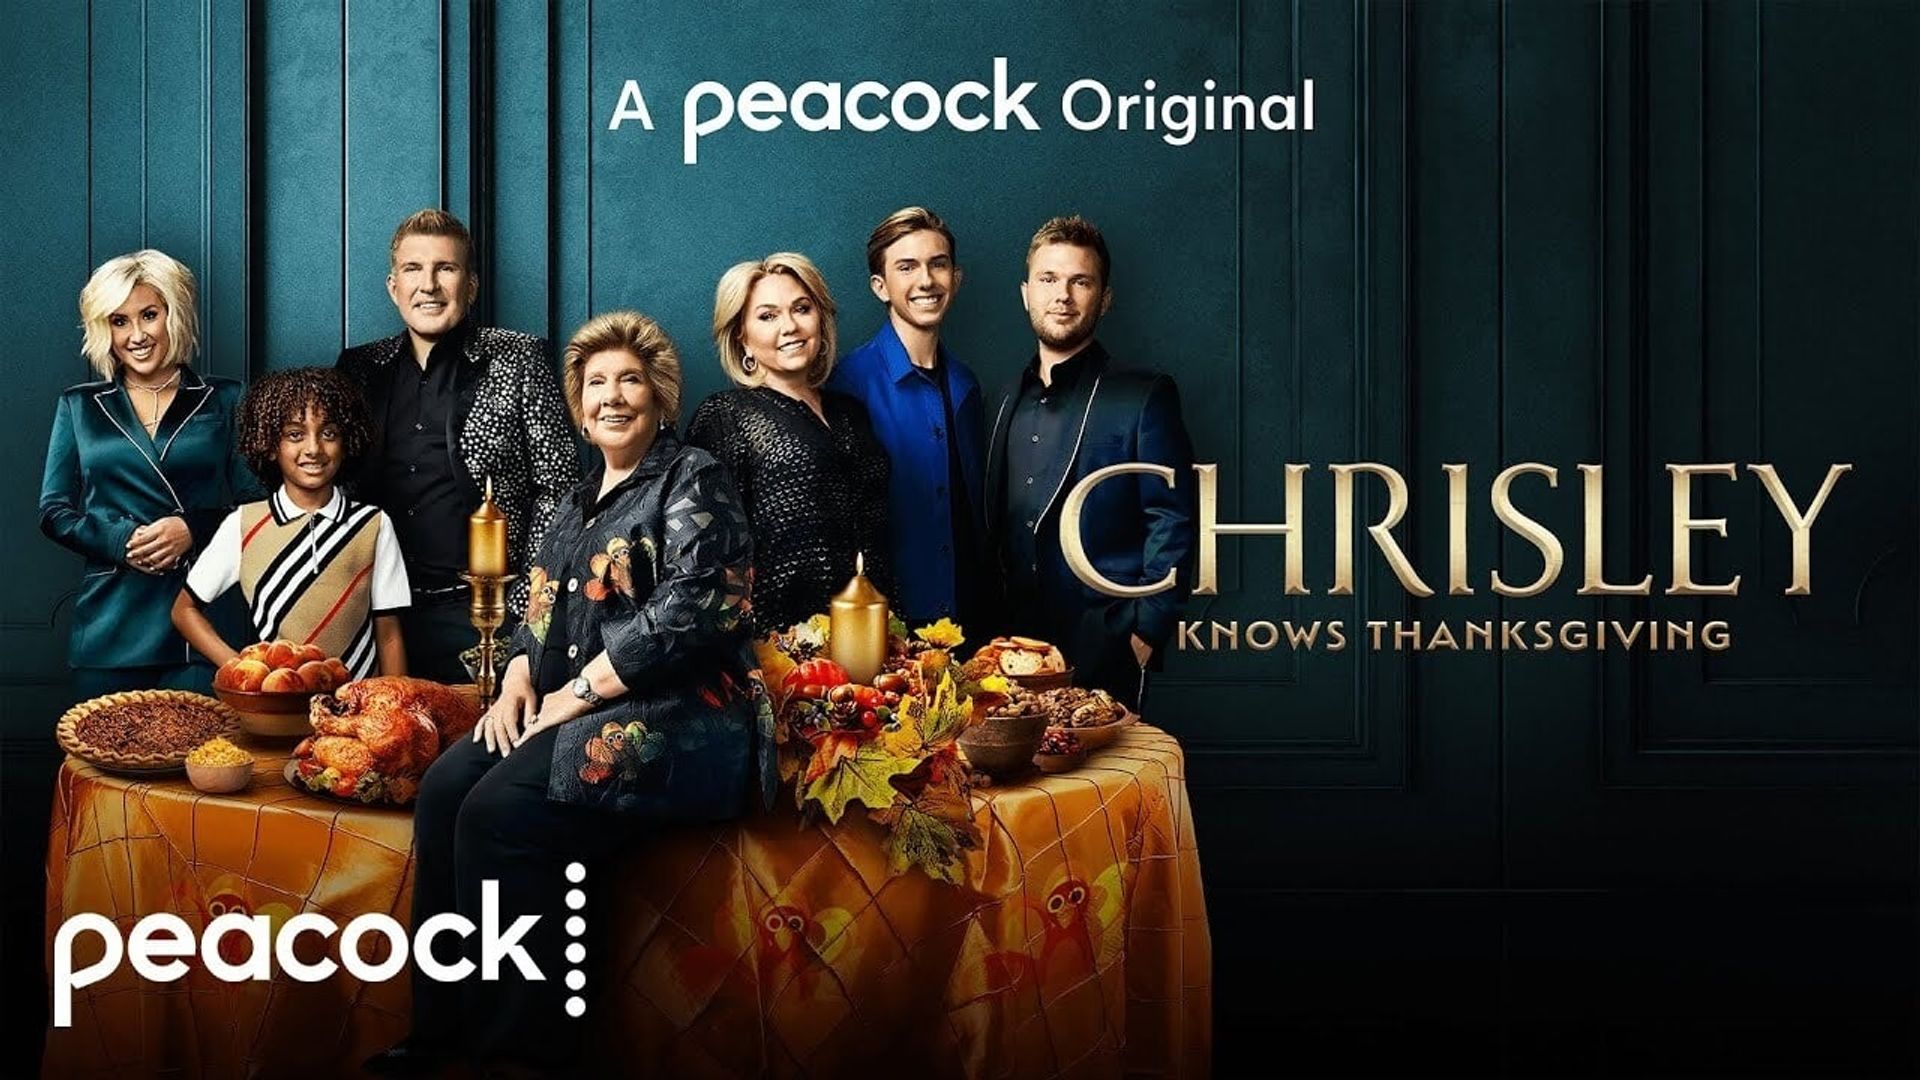 Chrisley Knows Thanksgiving background